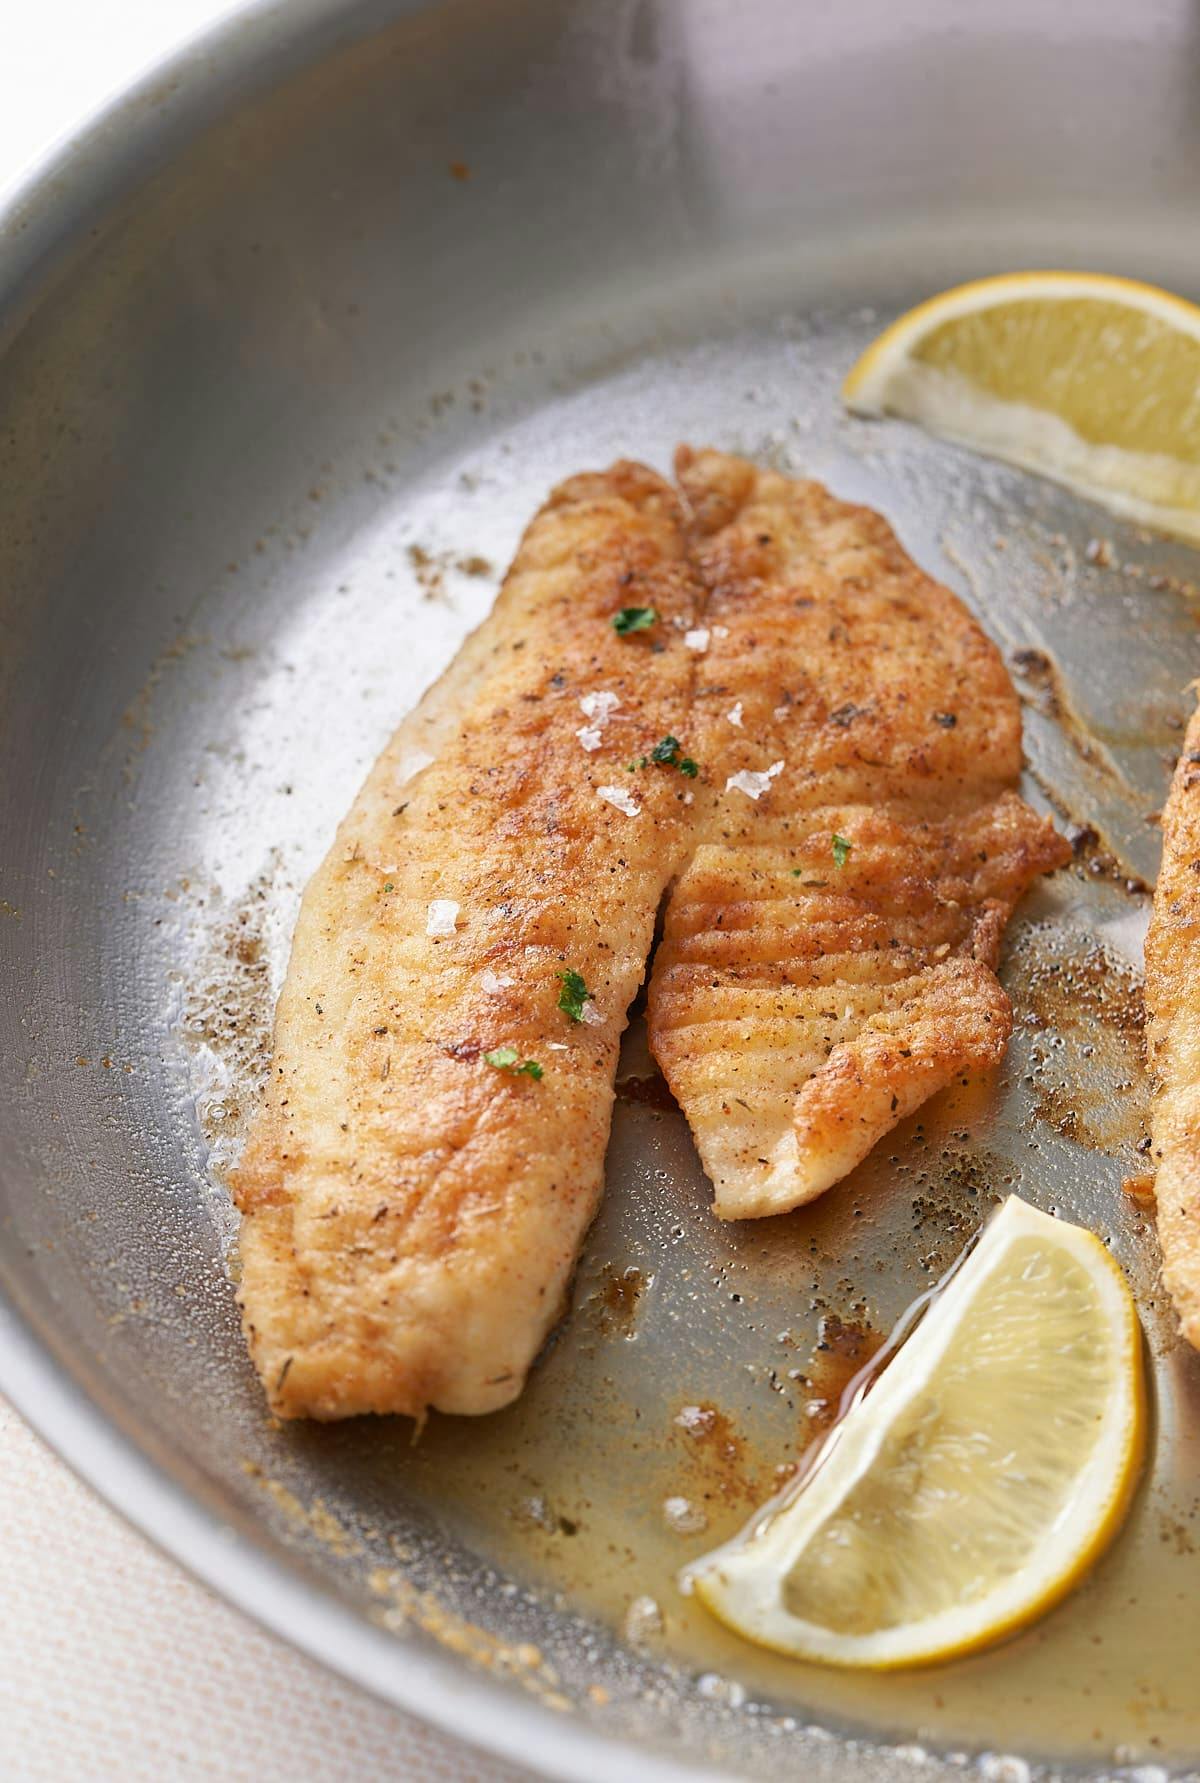 fried fish in skillet with lemon on side